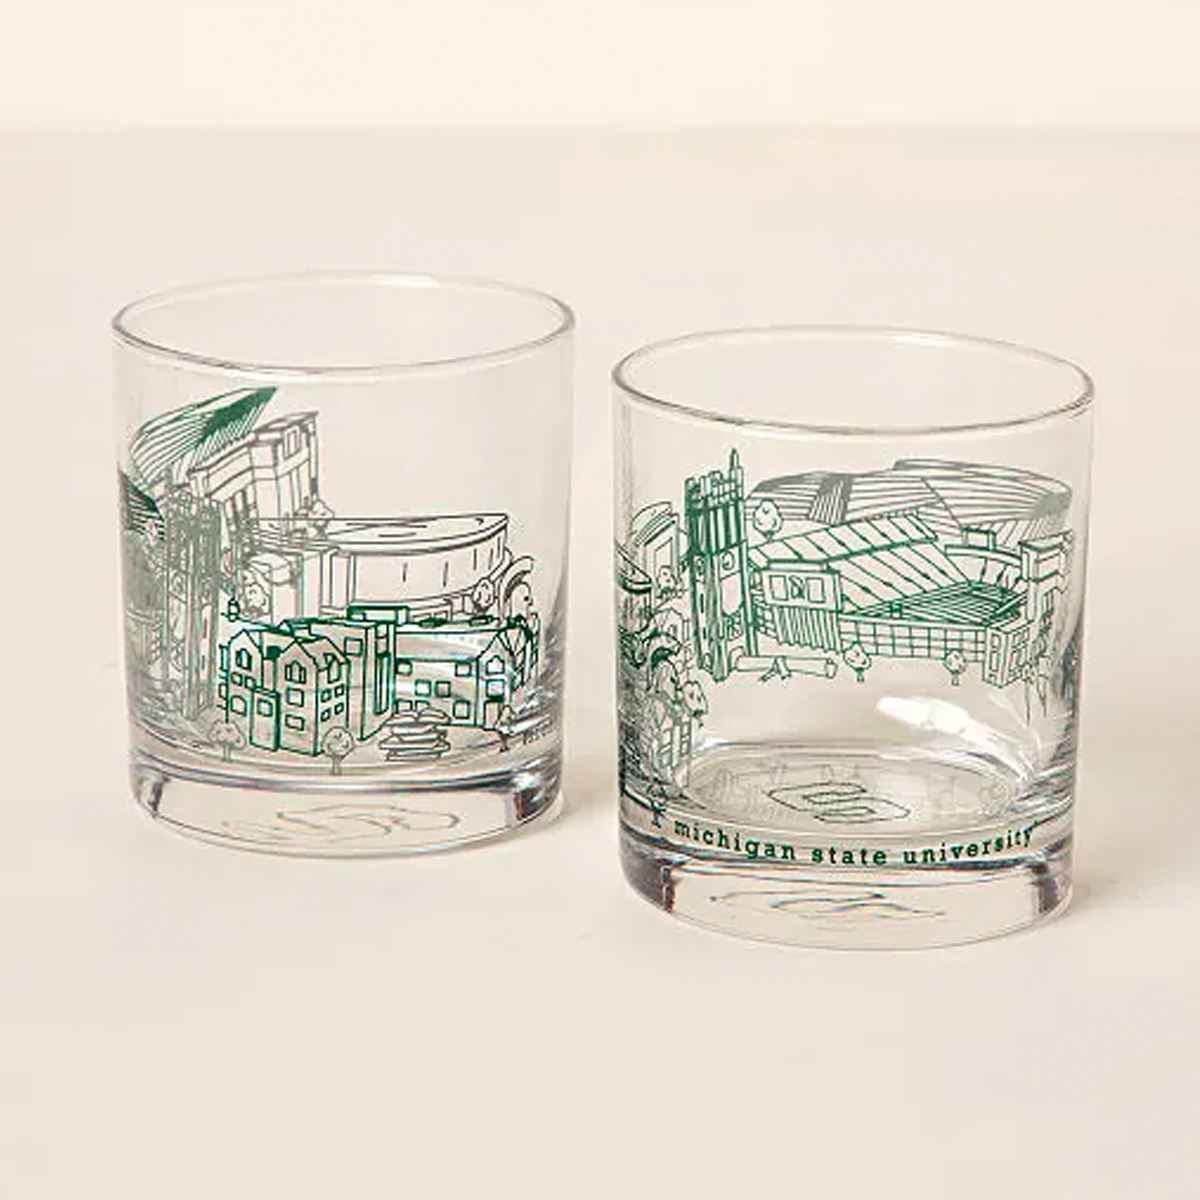 A keepsake they’ll appreciate later on in life, glasses printed with any grad’s school, especially when the designs are as subtle as stylish as these. $35, Uncommon Goods. <a href="https://www.uncommongoods.com/product/college-cityscape-rocks-glasses-set-of-2/541670000032">Get it now!</a><p>Sign up for today’s biggest stories, from pop culture to politics.</p><a href="https://www.glamour.com/newsletter/news?sourceCode=msnsend">Sign Up</a>